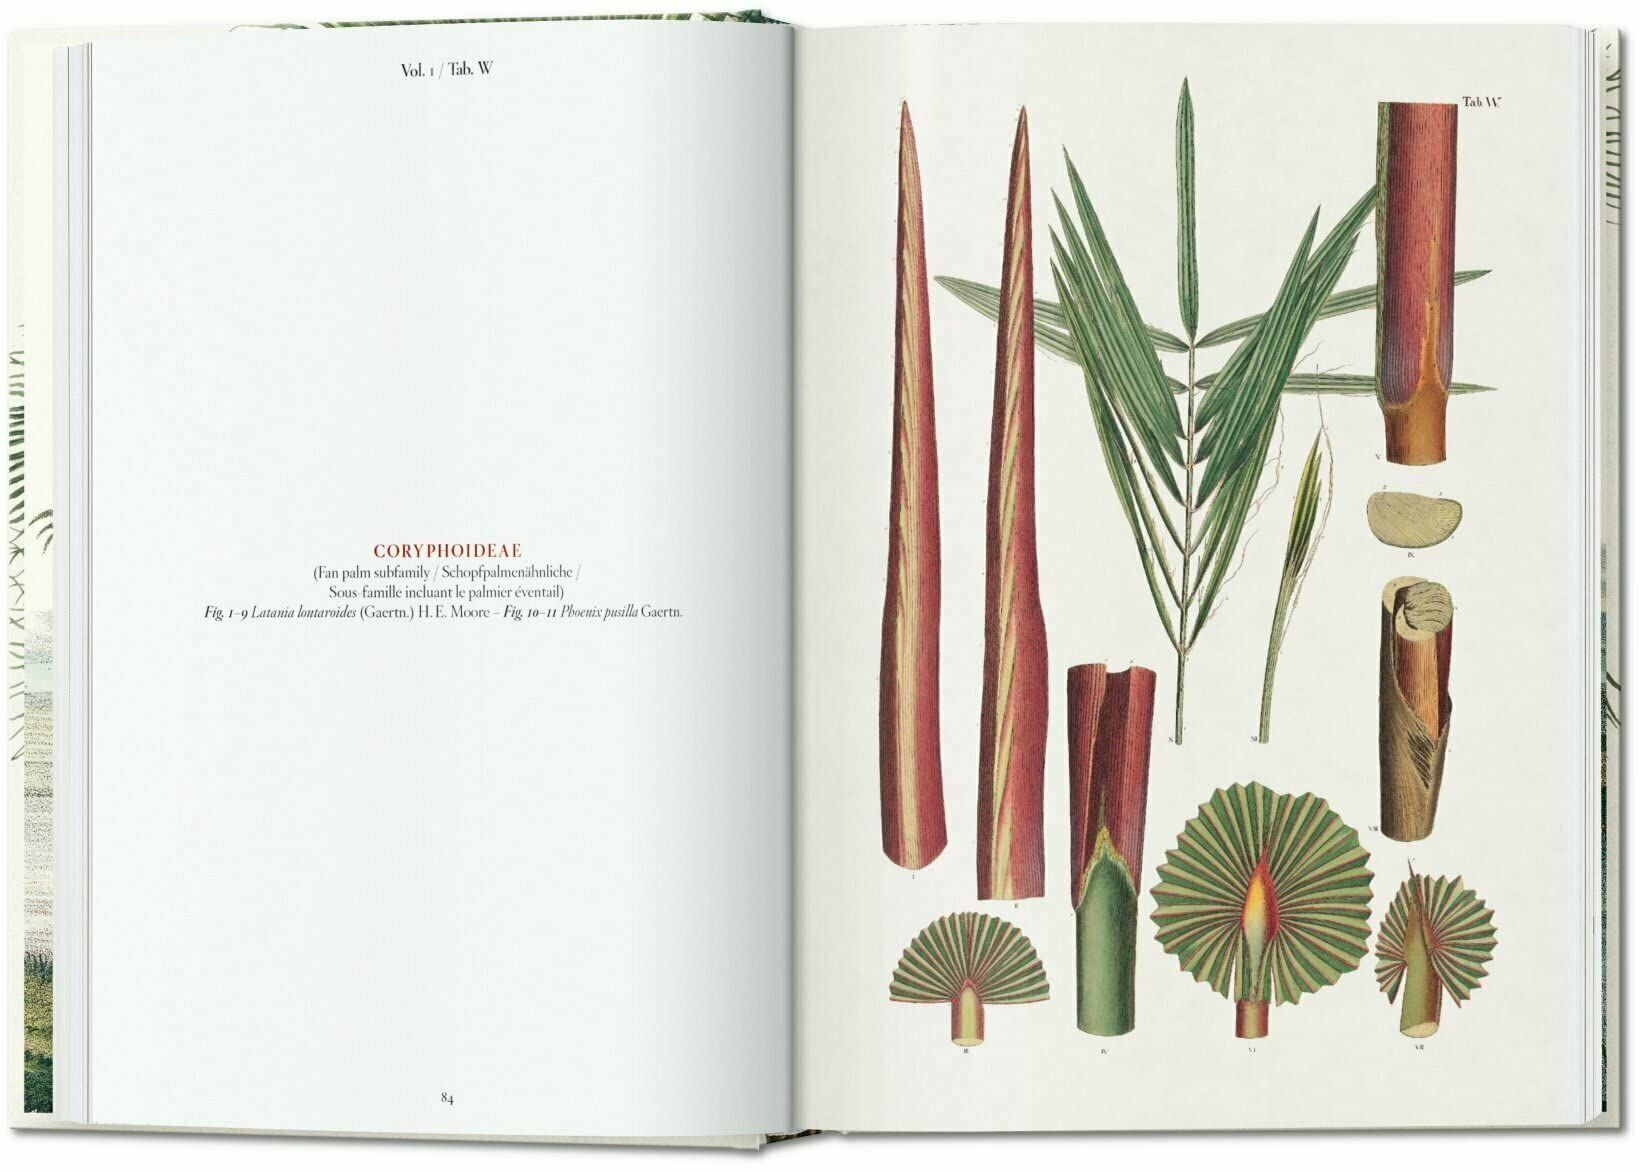  Martius. The Book of Palms. 40th Ed. 